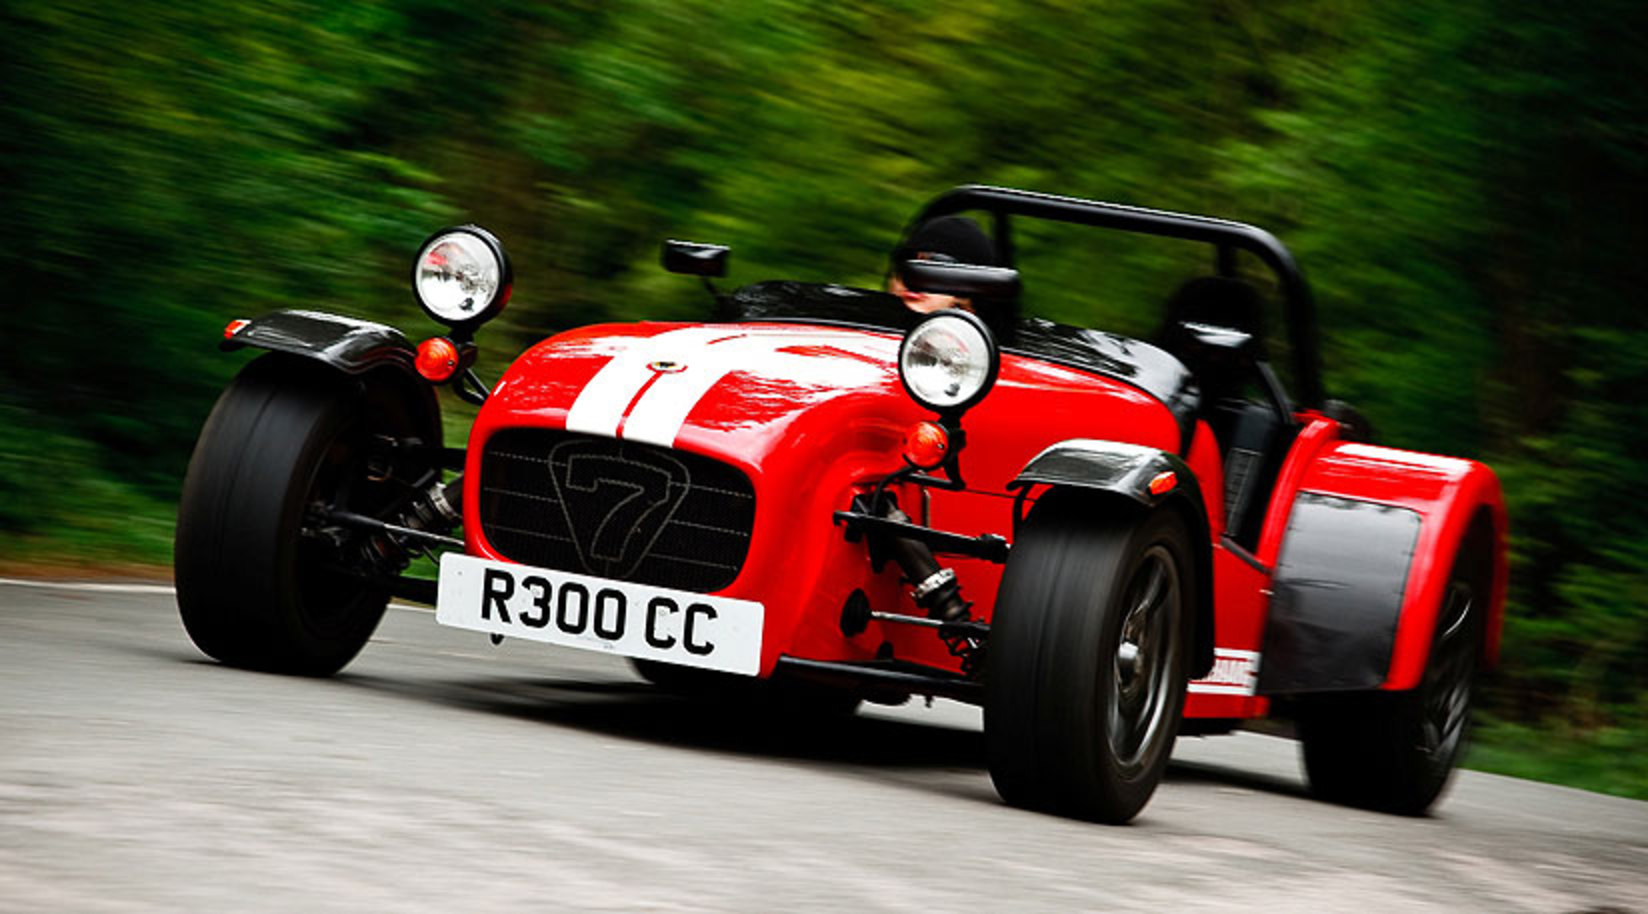 caterham cars and motorcycles. Pictures and interesting facts ...